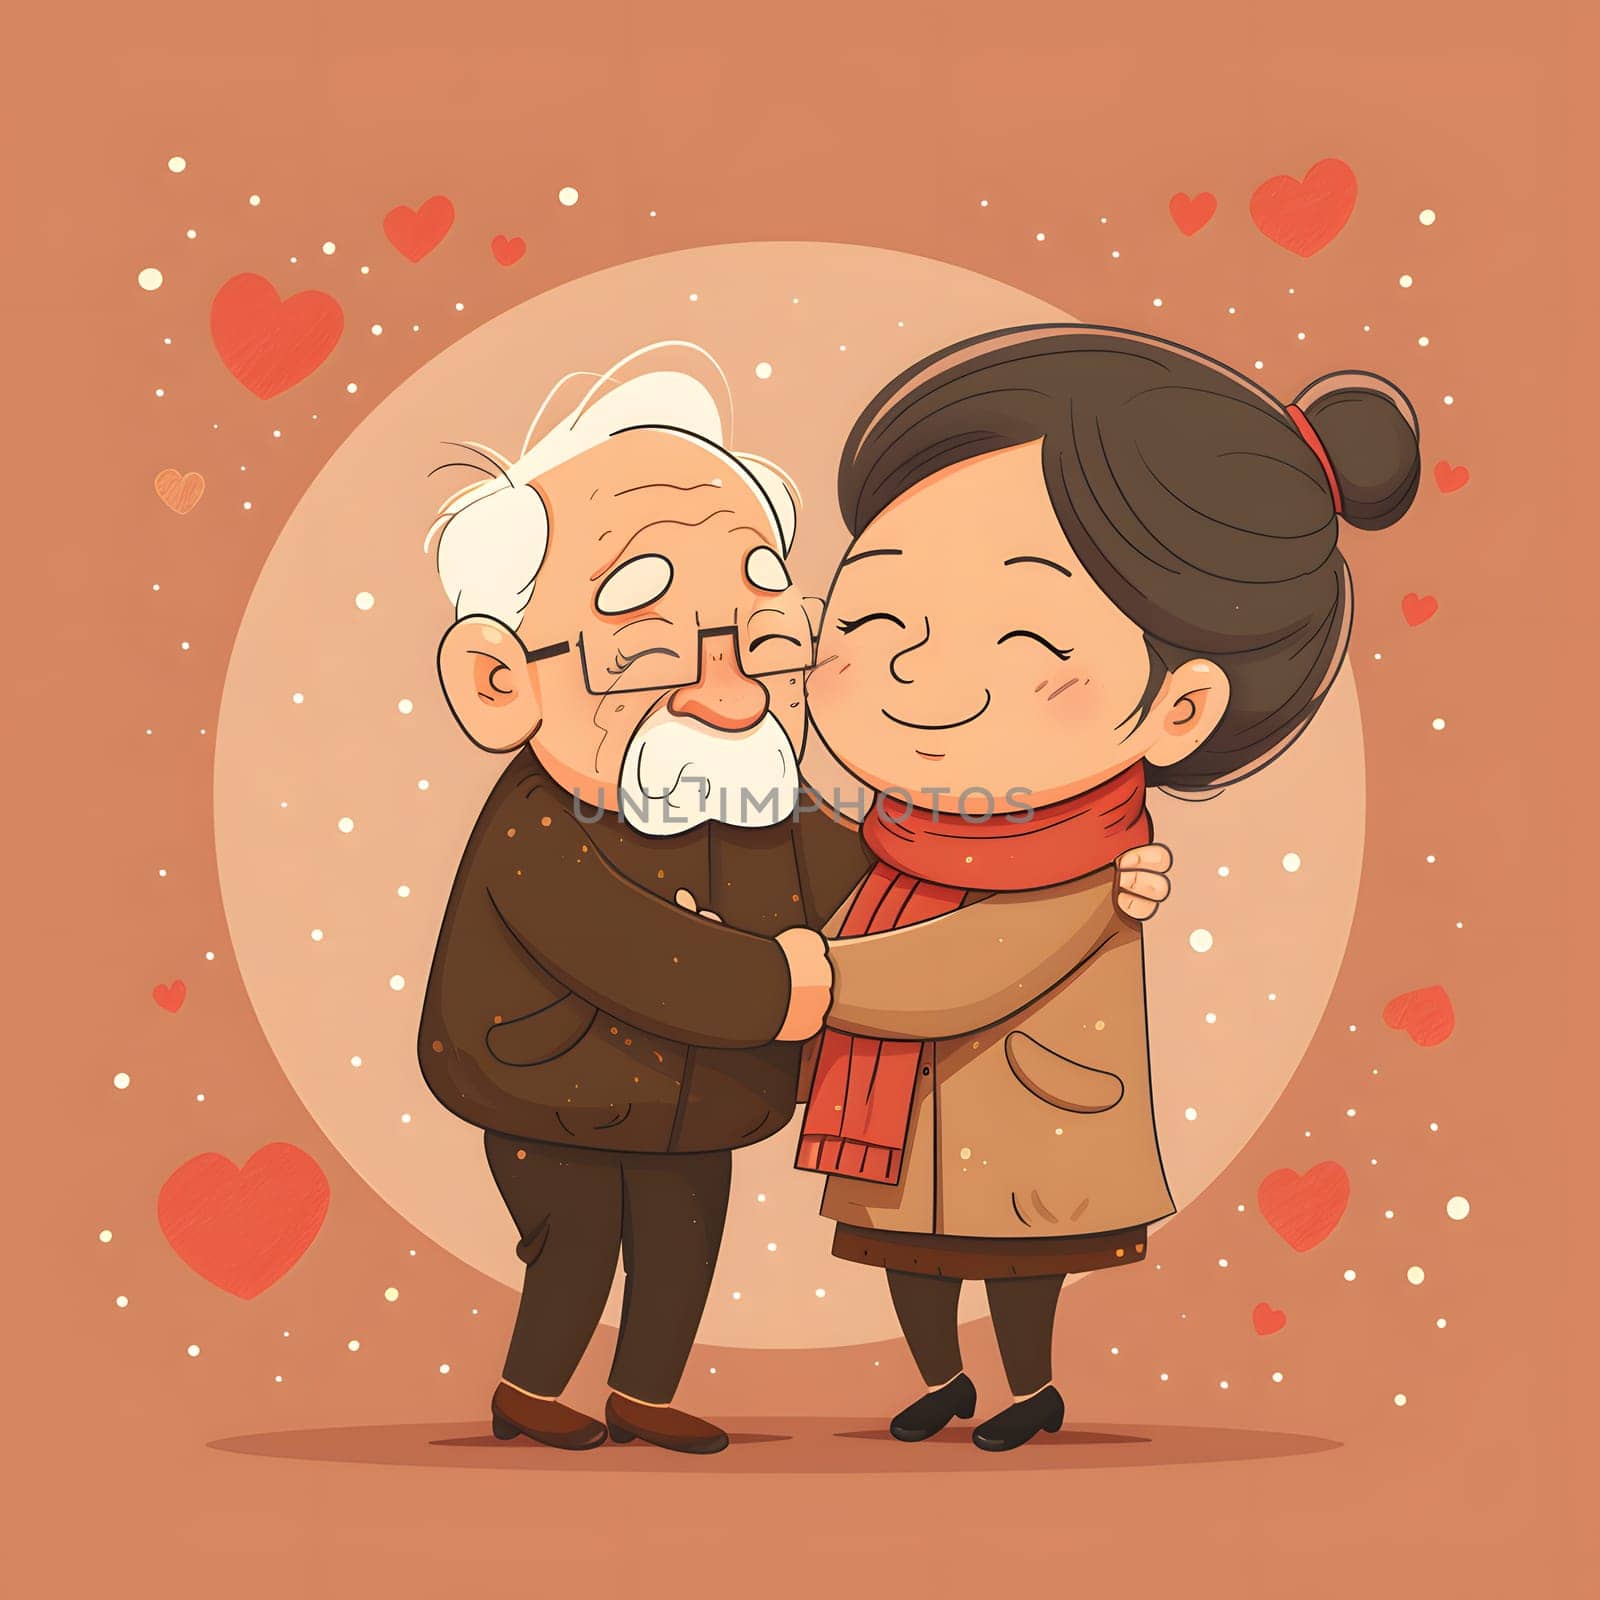 An elderly man and a young girl are embracing each other with happy smiles on their faces, creating a heartwarming scene resembling a joyful cartoon illustration